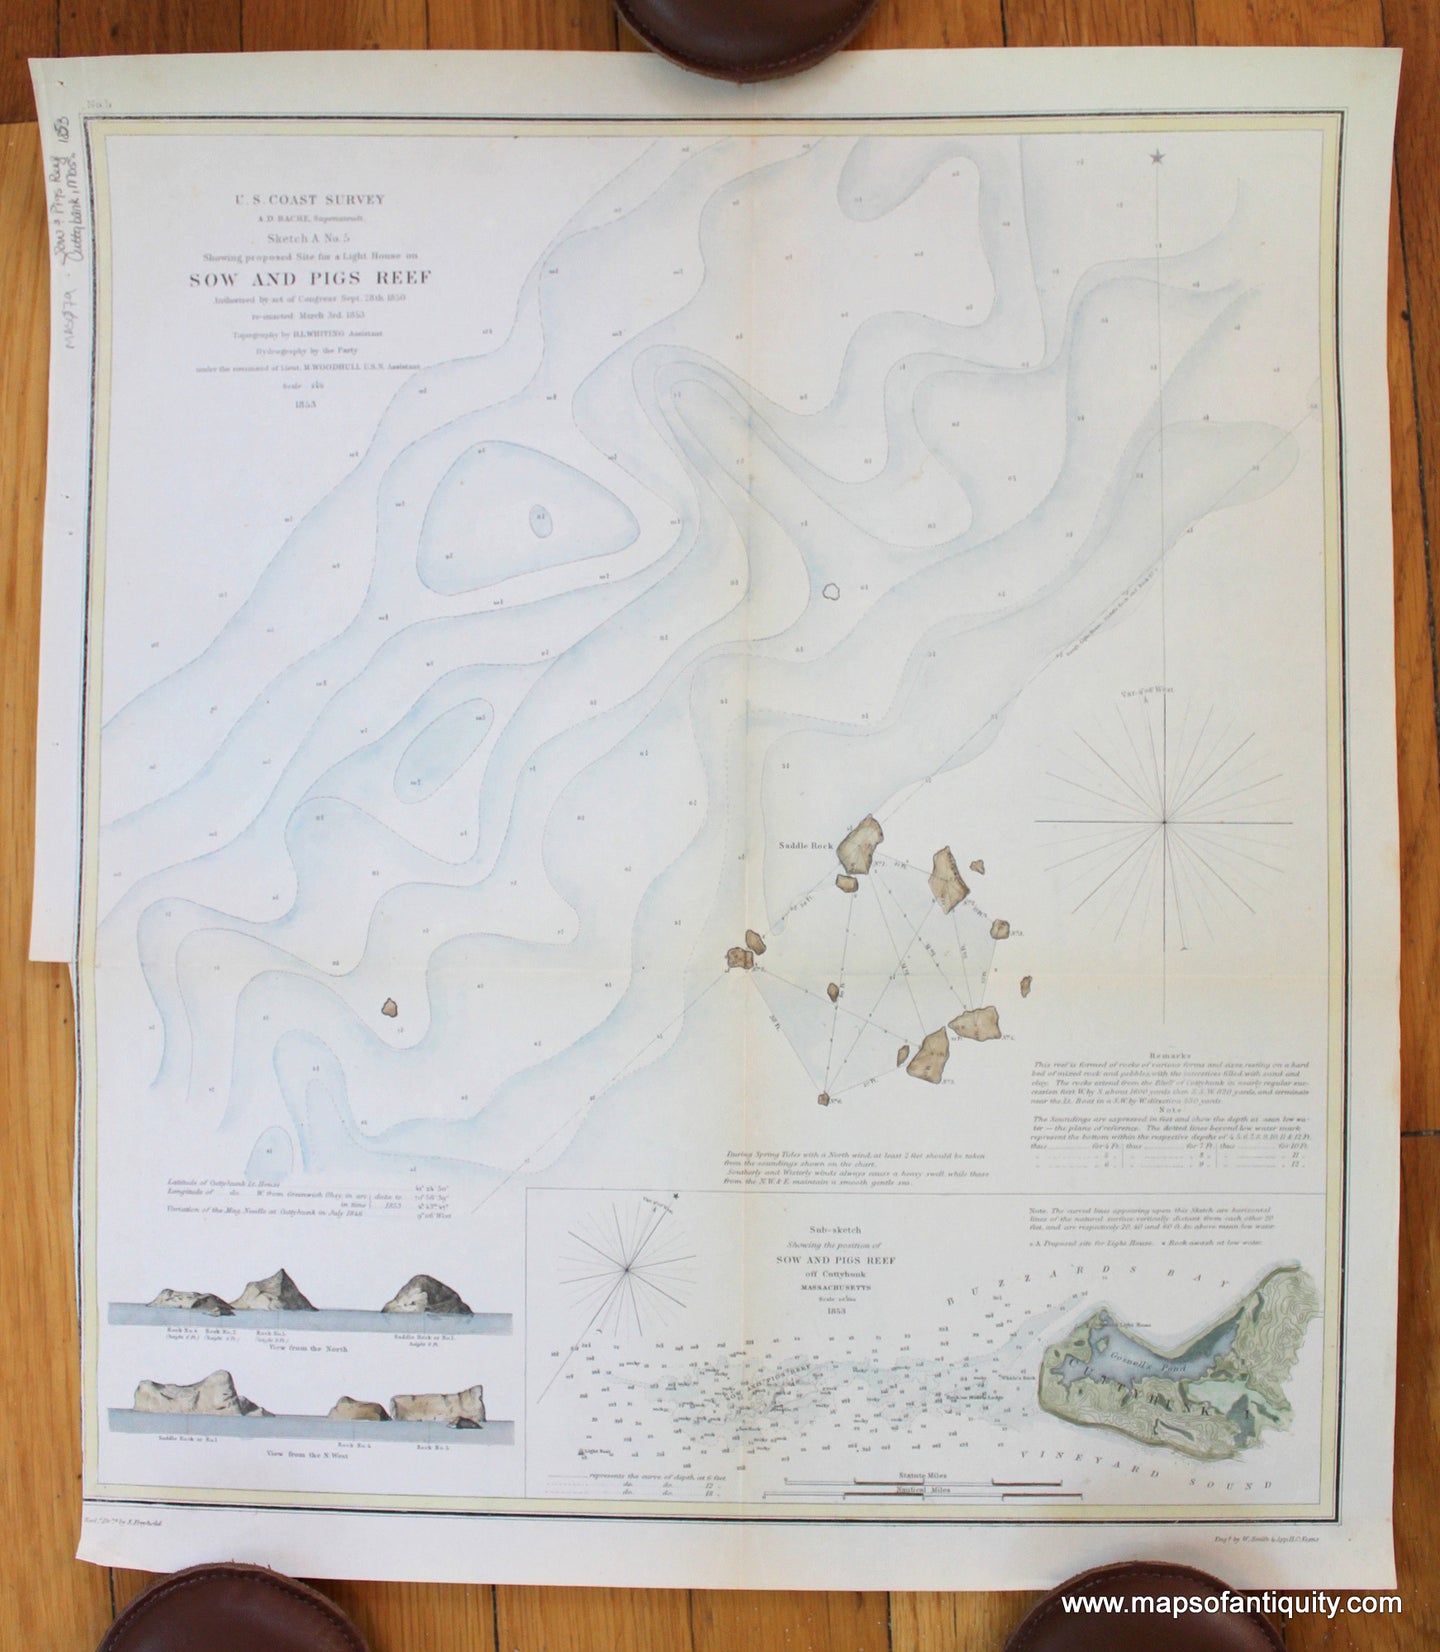 Antique-Map-Chart-Sow-&-Pigs-Reef-Cuttyhunk-U.-S.-Coast-and-Geodetic-Survey-1853-1850s-1800s-19th-century-Maps-Of-Antiquity